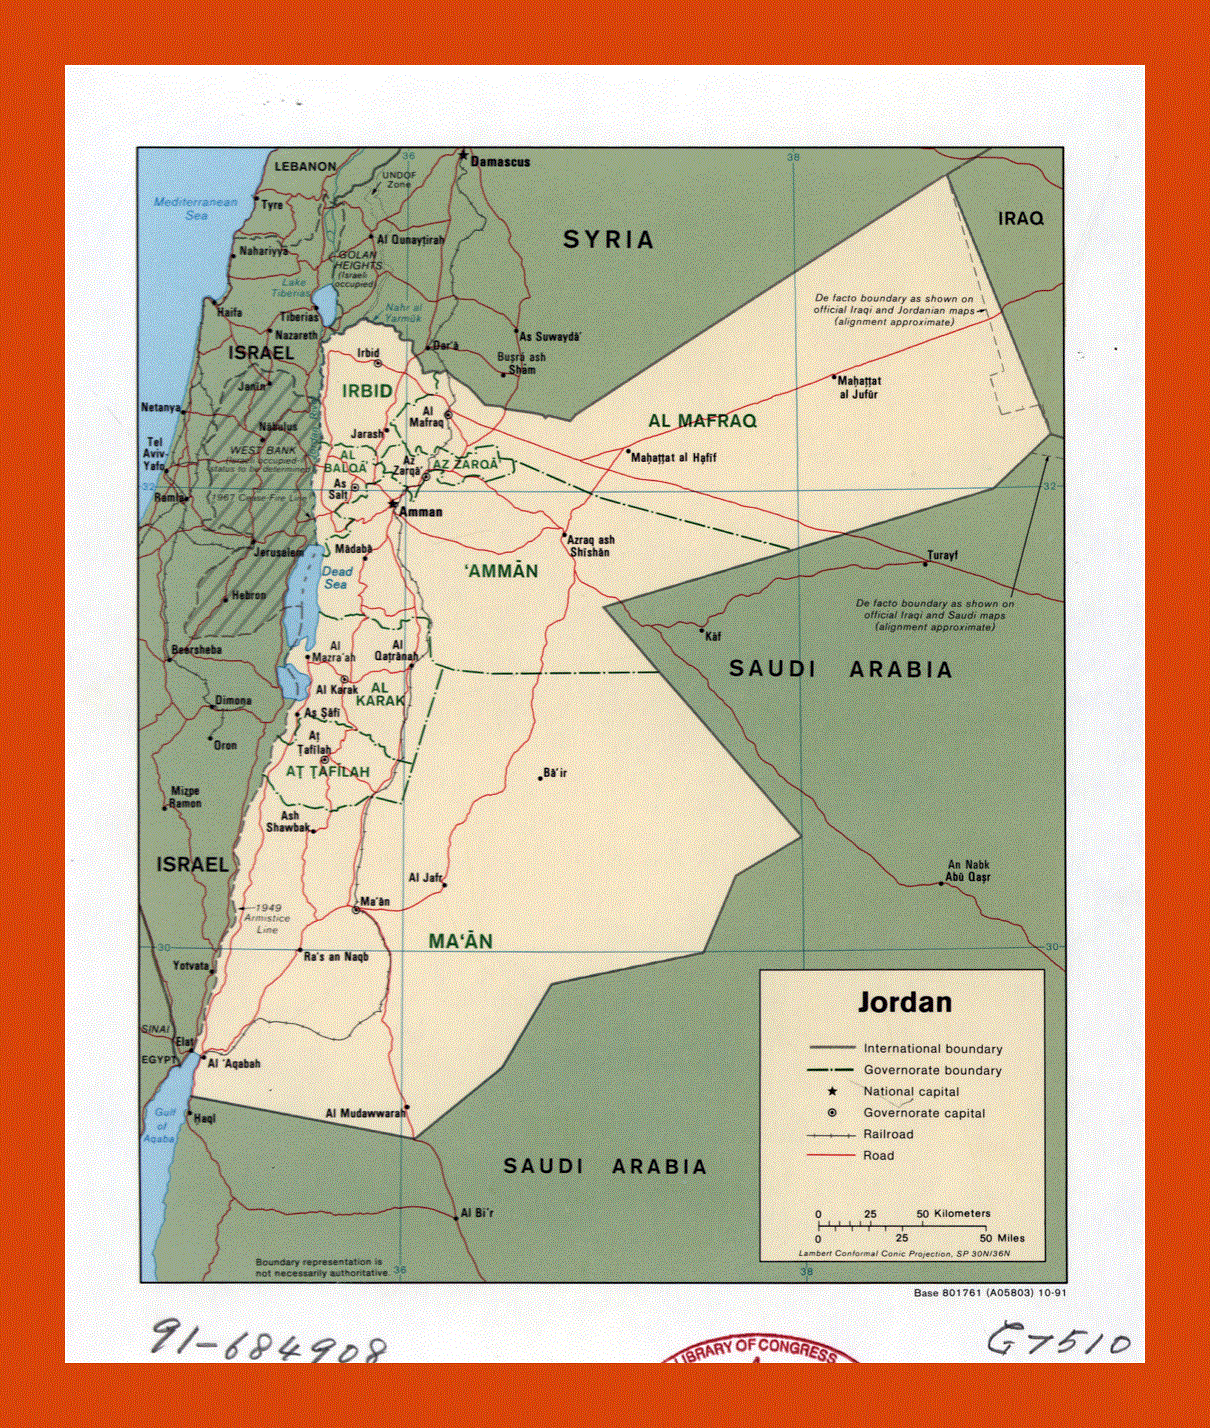 Political and administrative map of Jordan - 1991